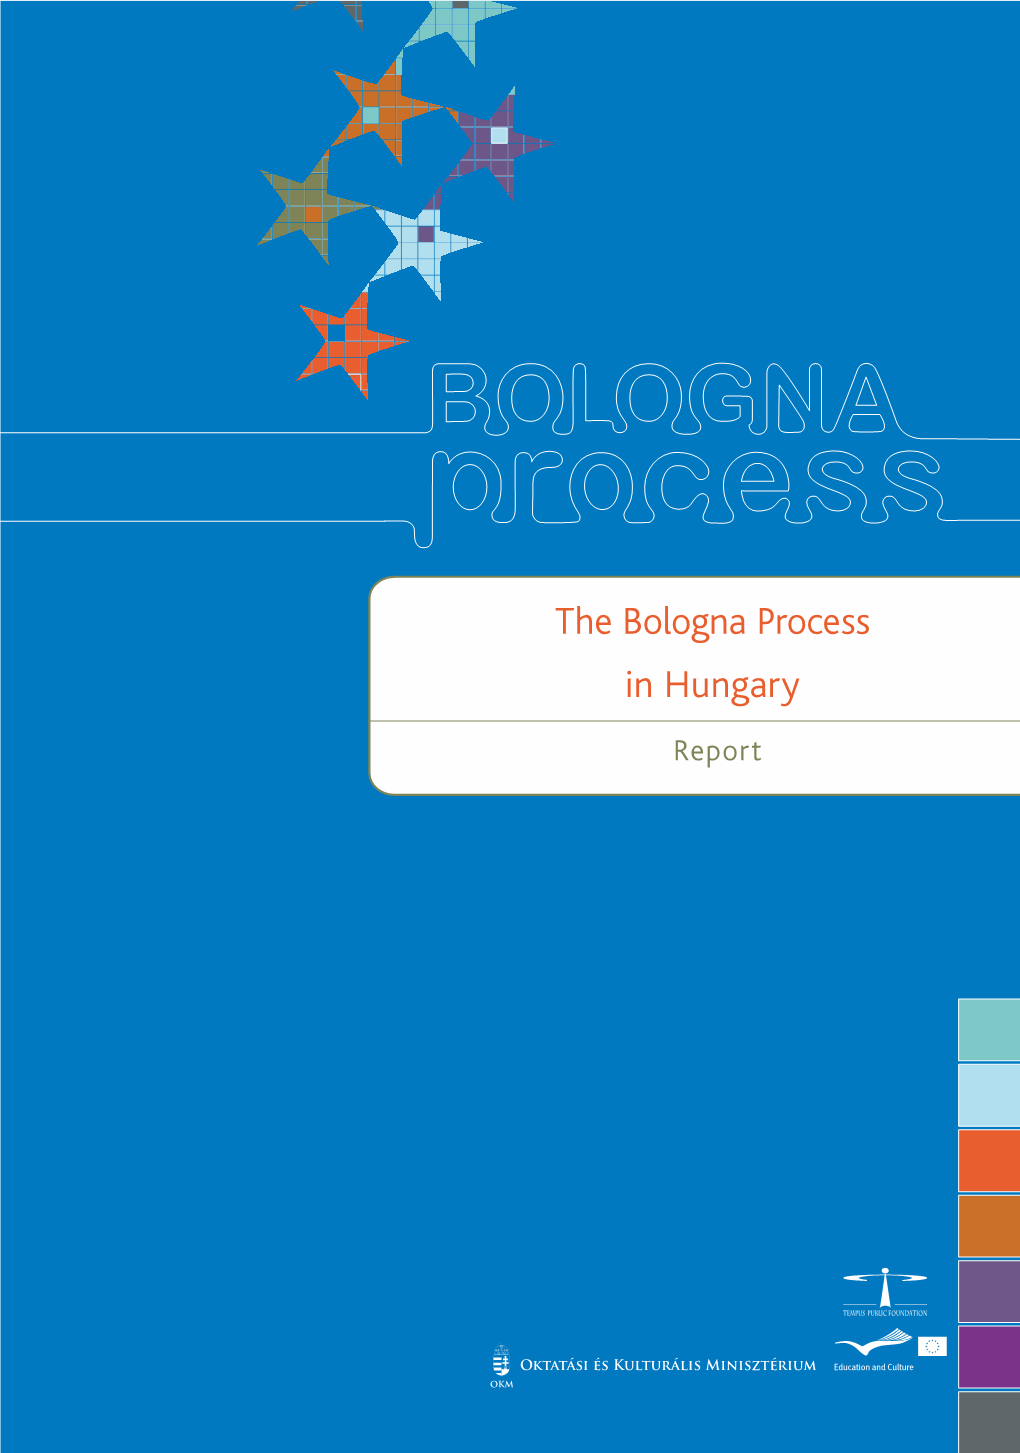 The Bologna Process in Hungary